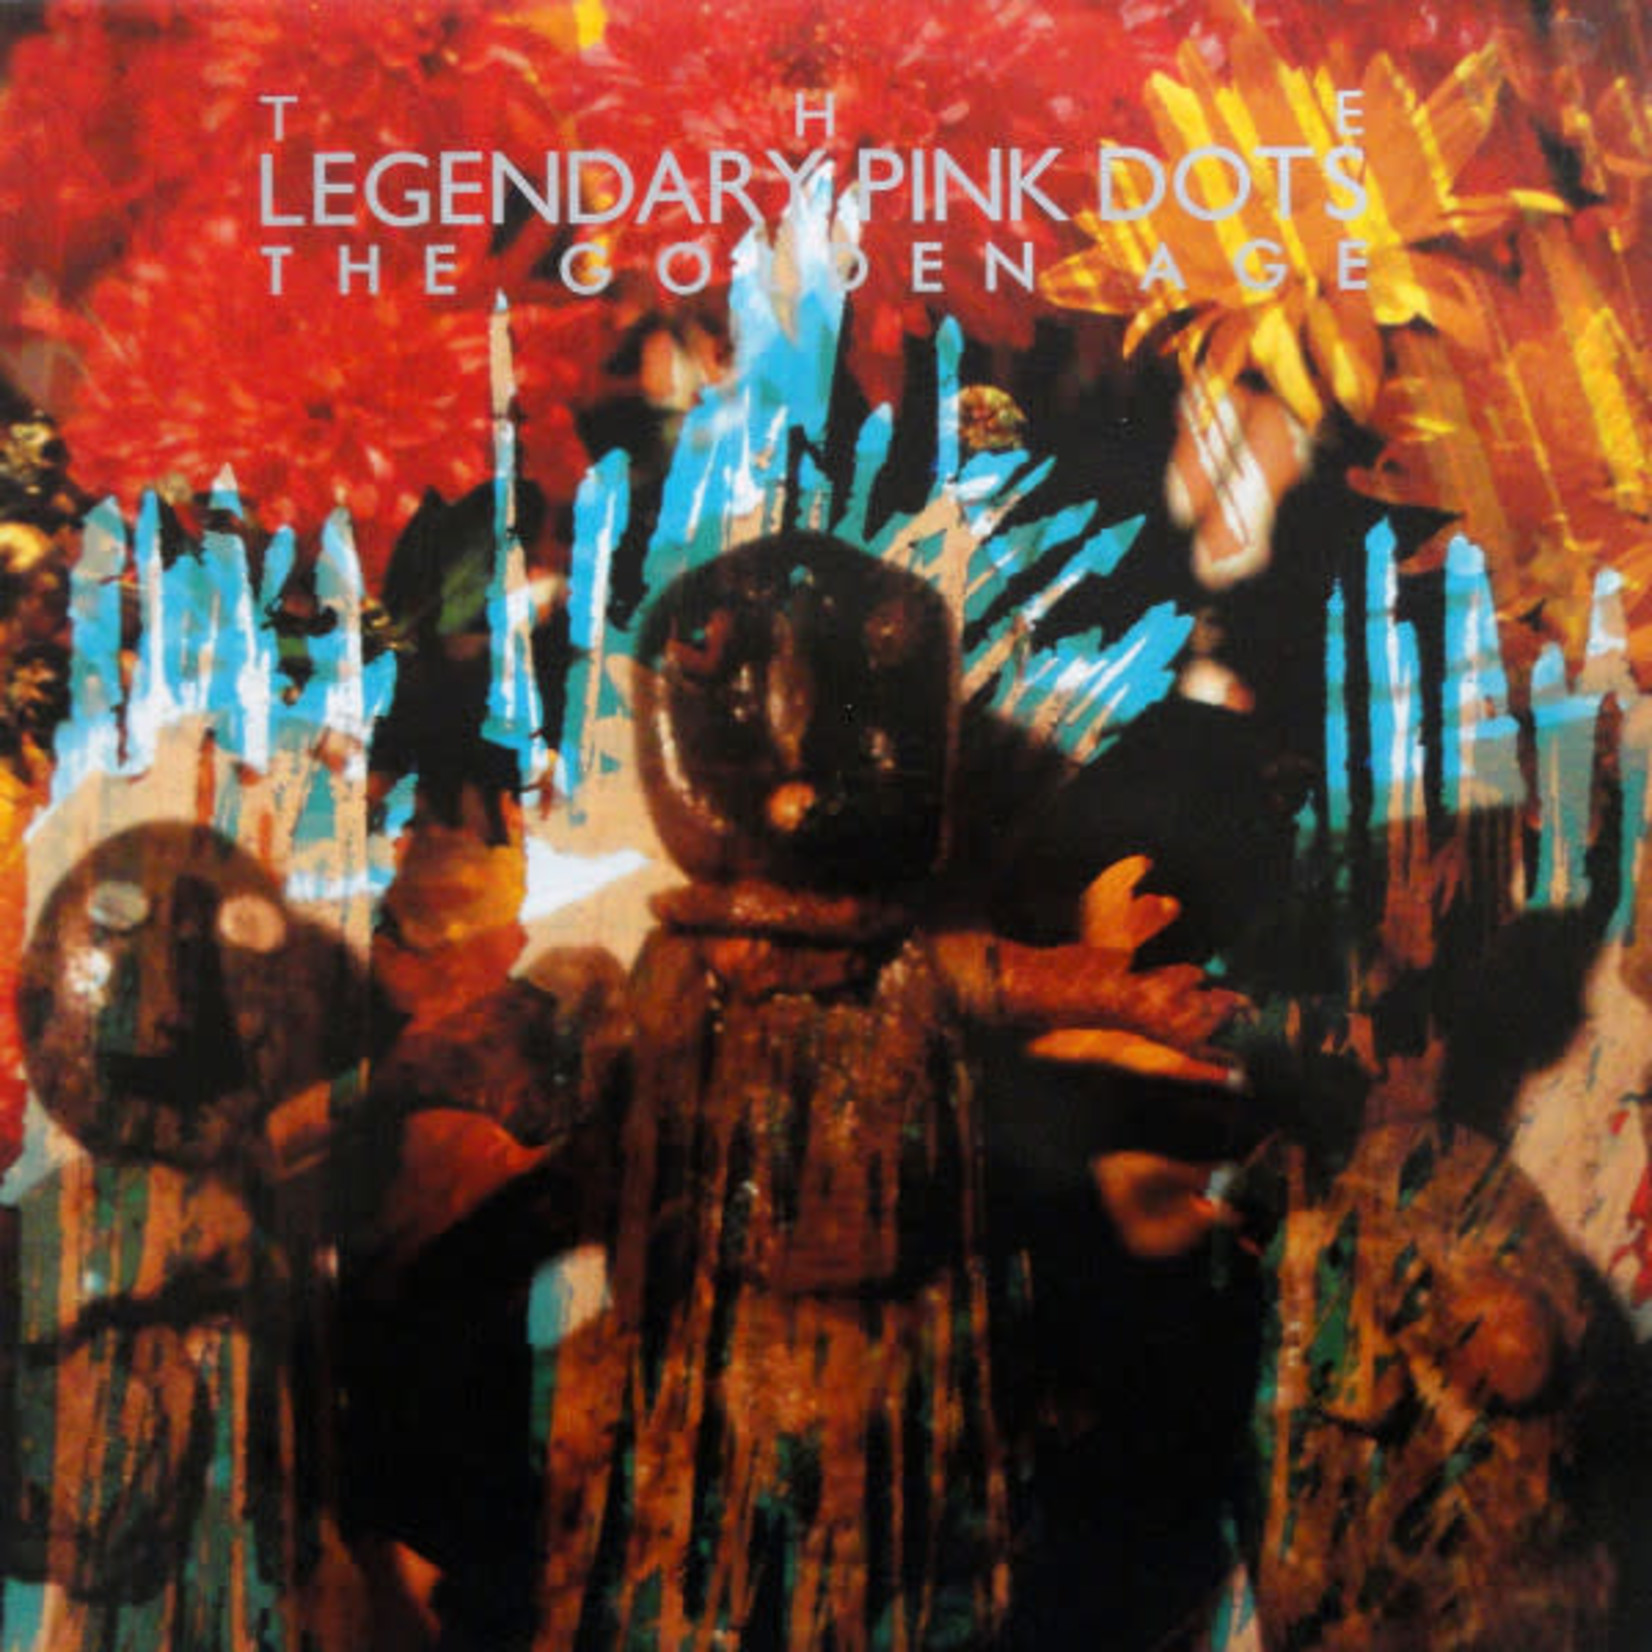 THE LEGENDARY PINK DOTS – THE GOLDEN AGE  - LP